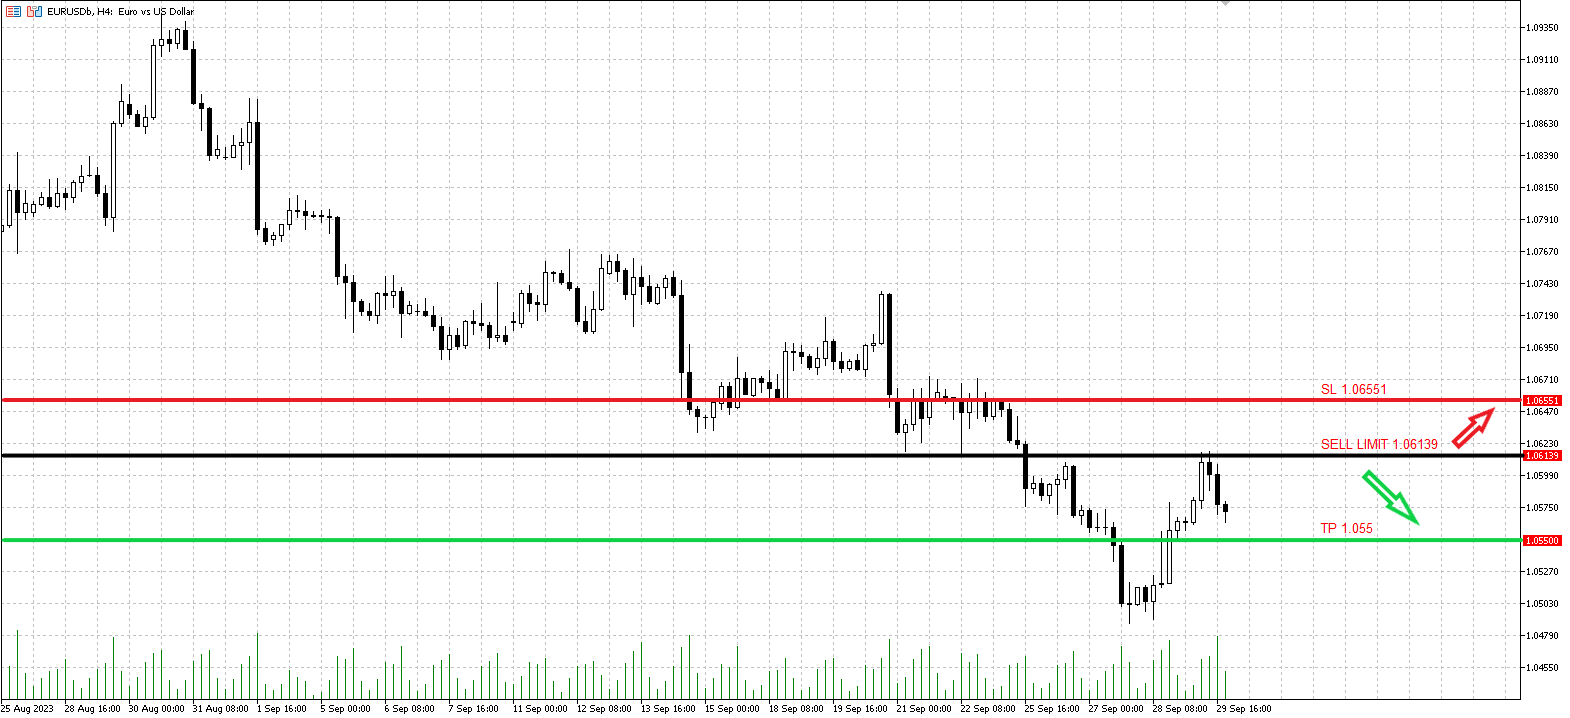 Trade Insight: Establish a sell limit at 1.06139, targeting a price point of 1.055, with a stop loss set at 1.06551.